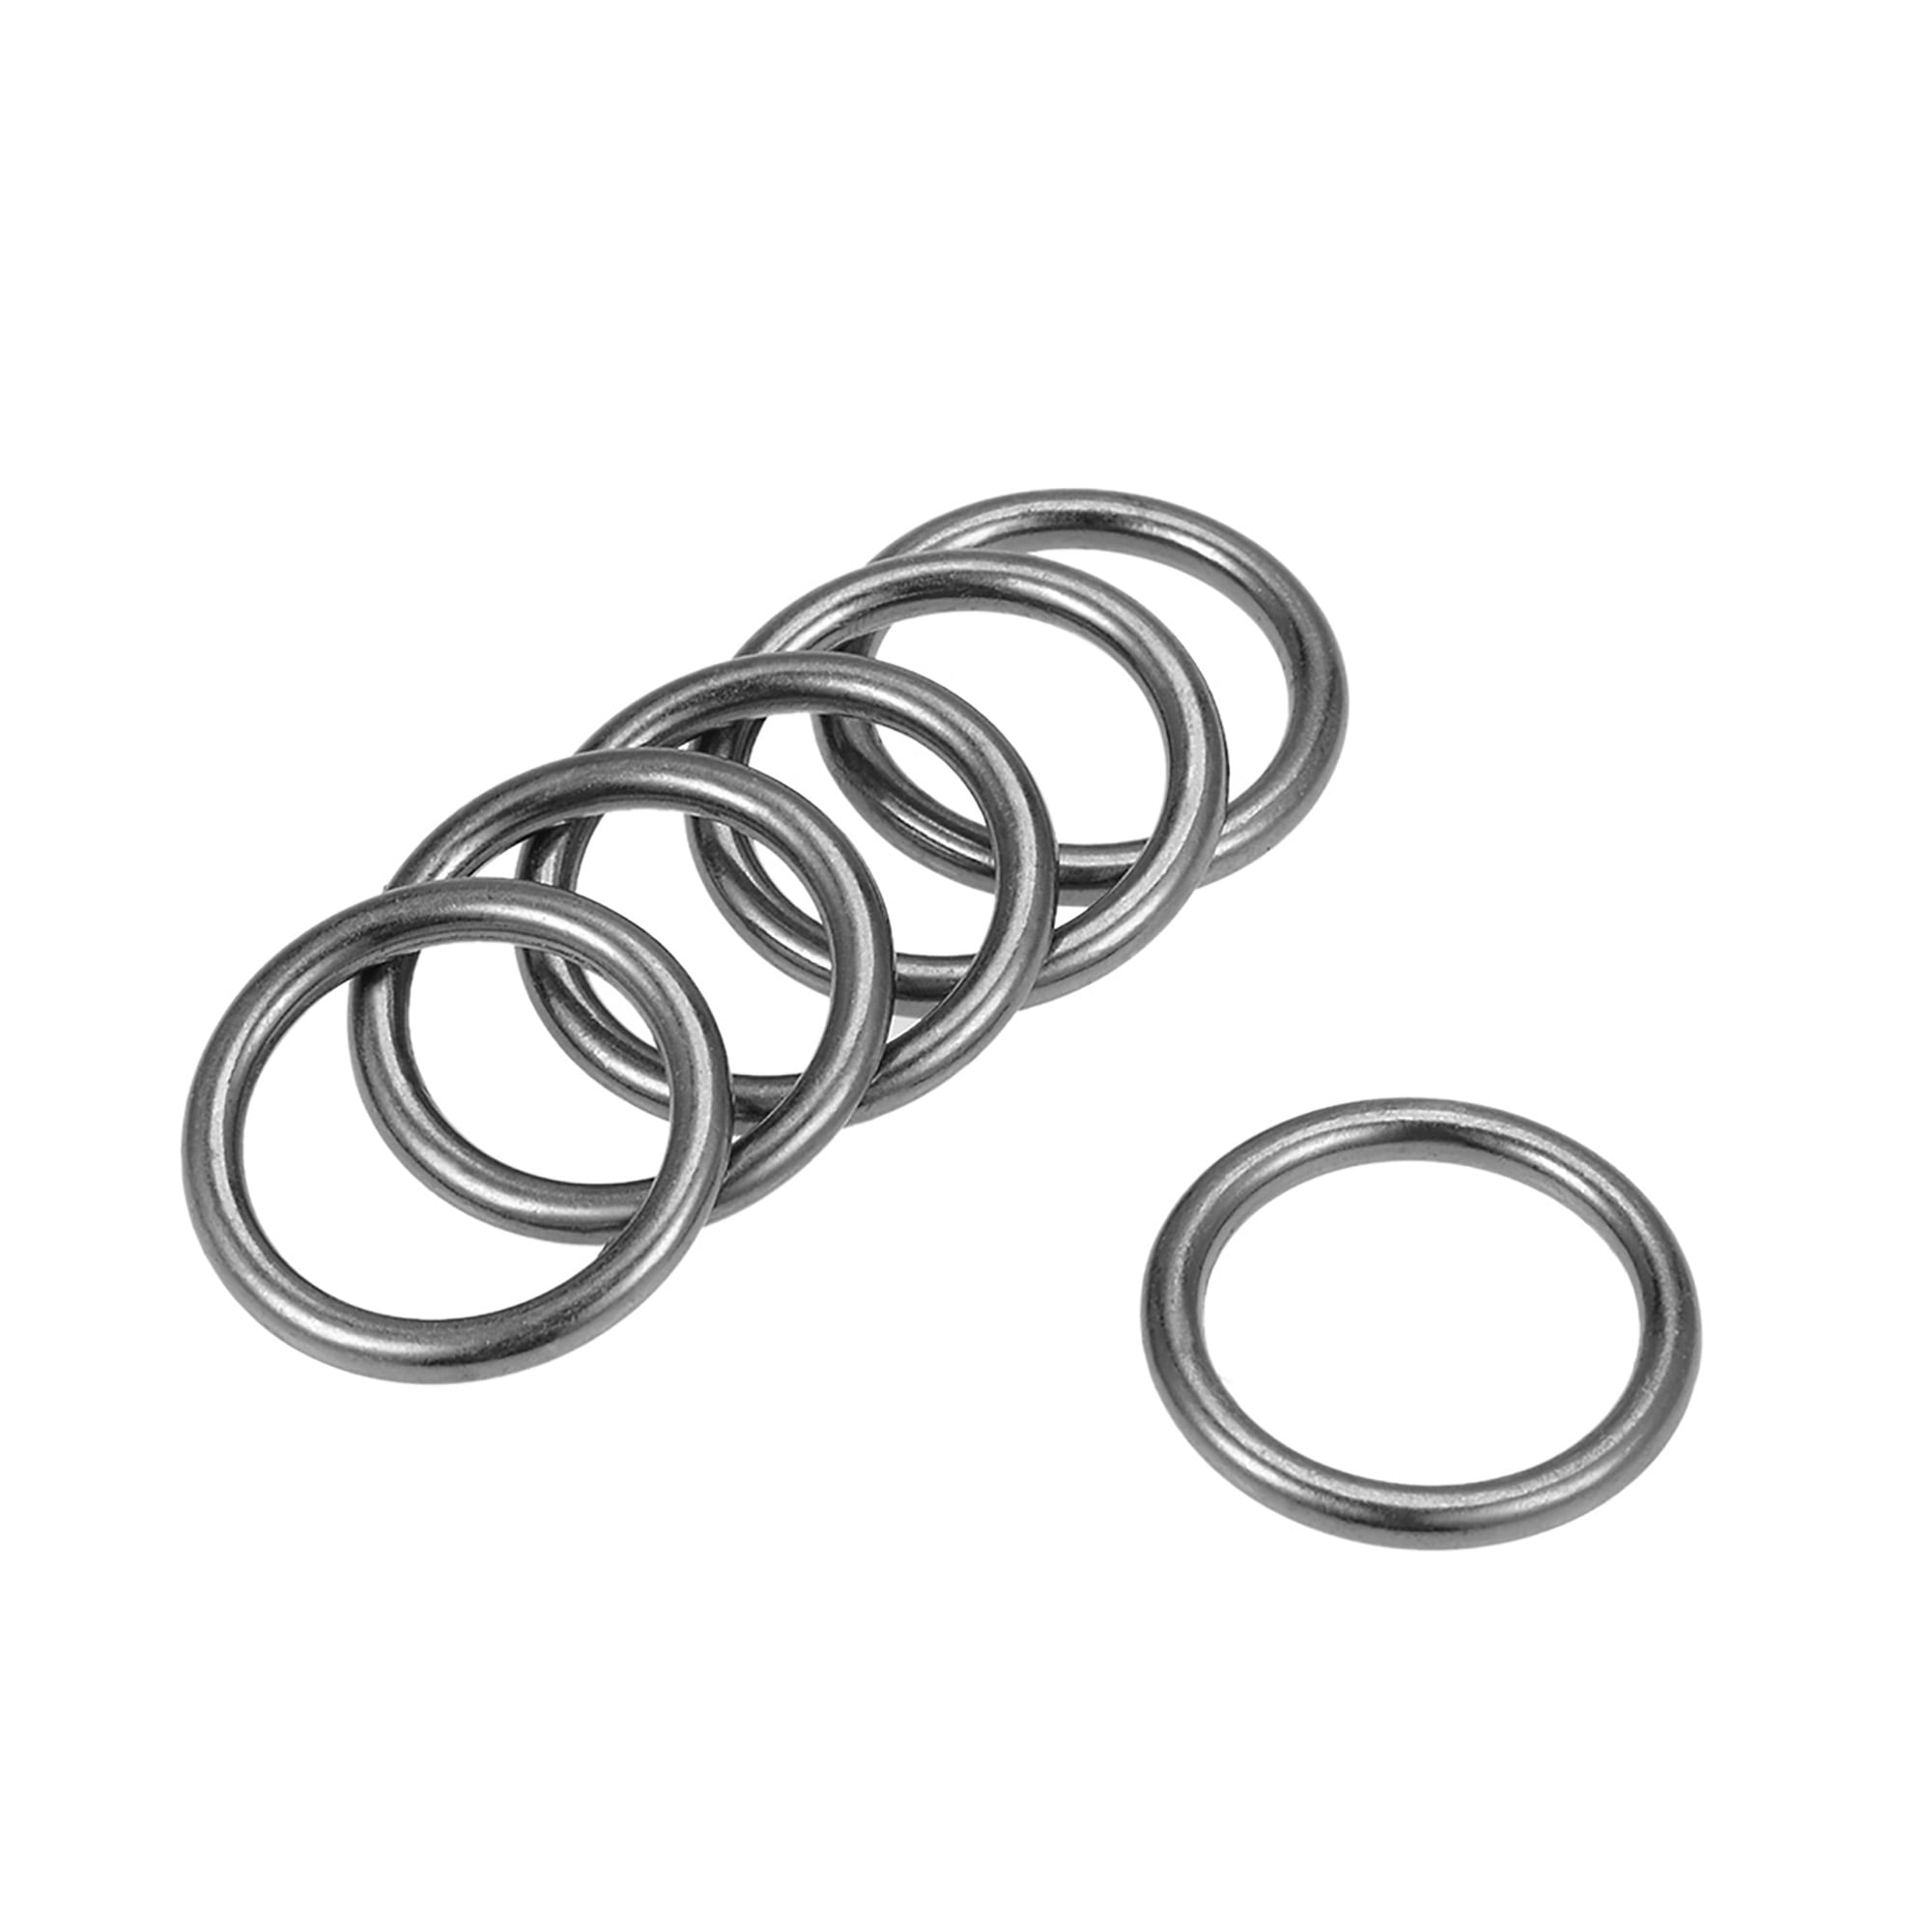 6Pcs O Ring Buckle 0.8-Inch(20mm) Zinc Alloy O-Rings Black for Hardware ...